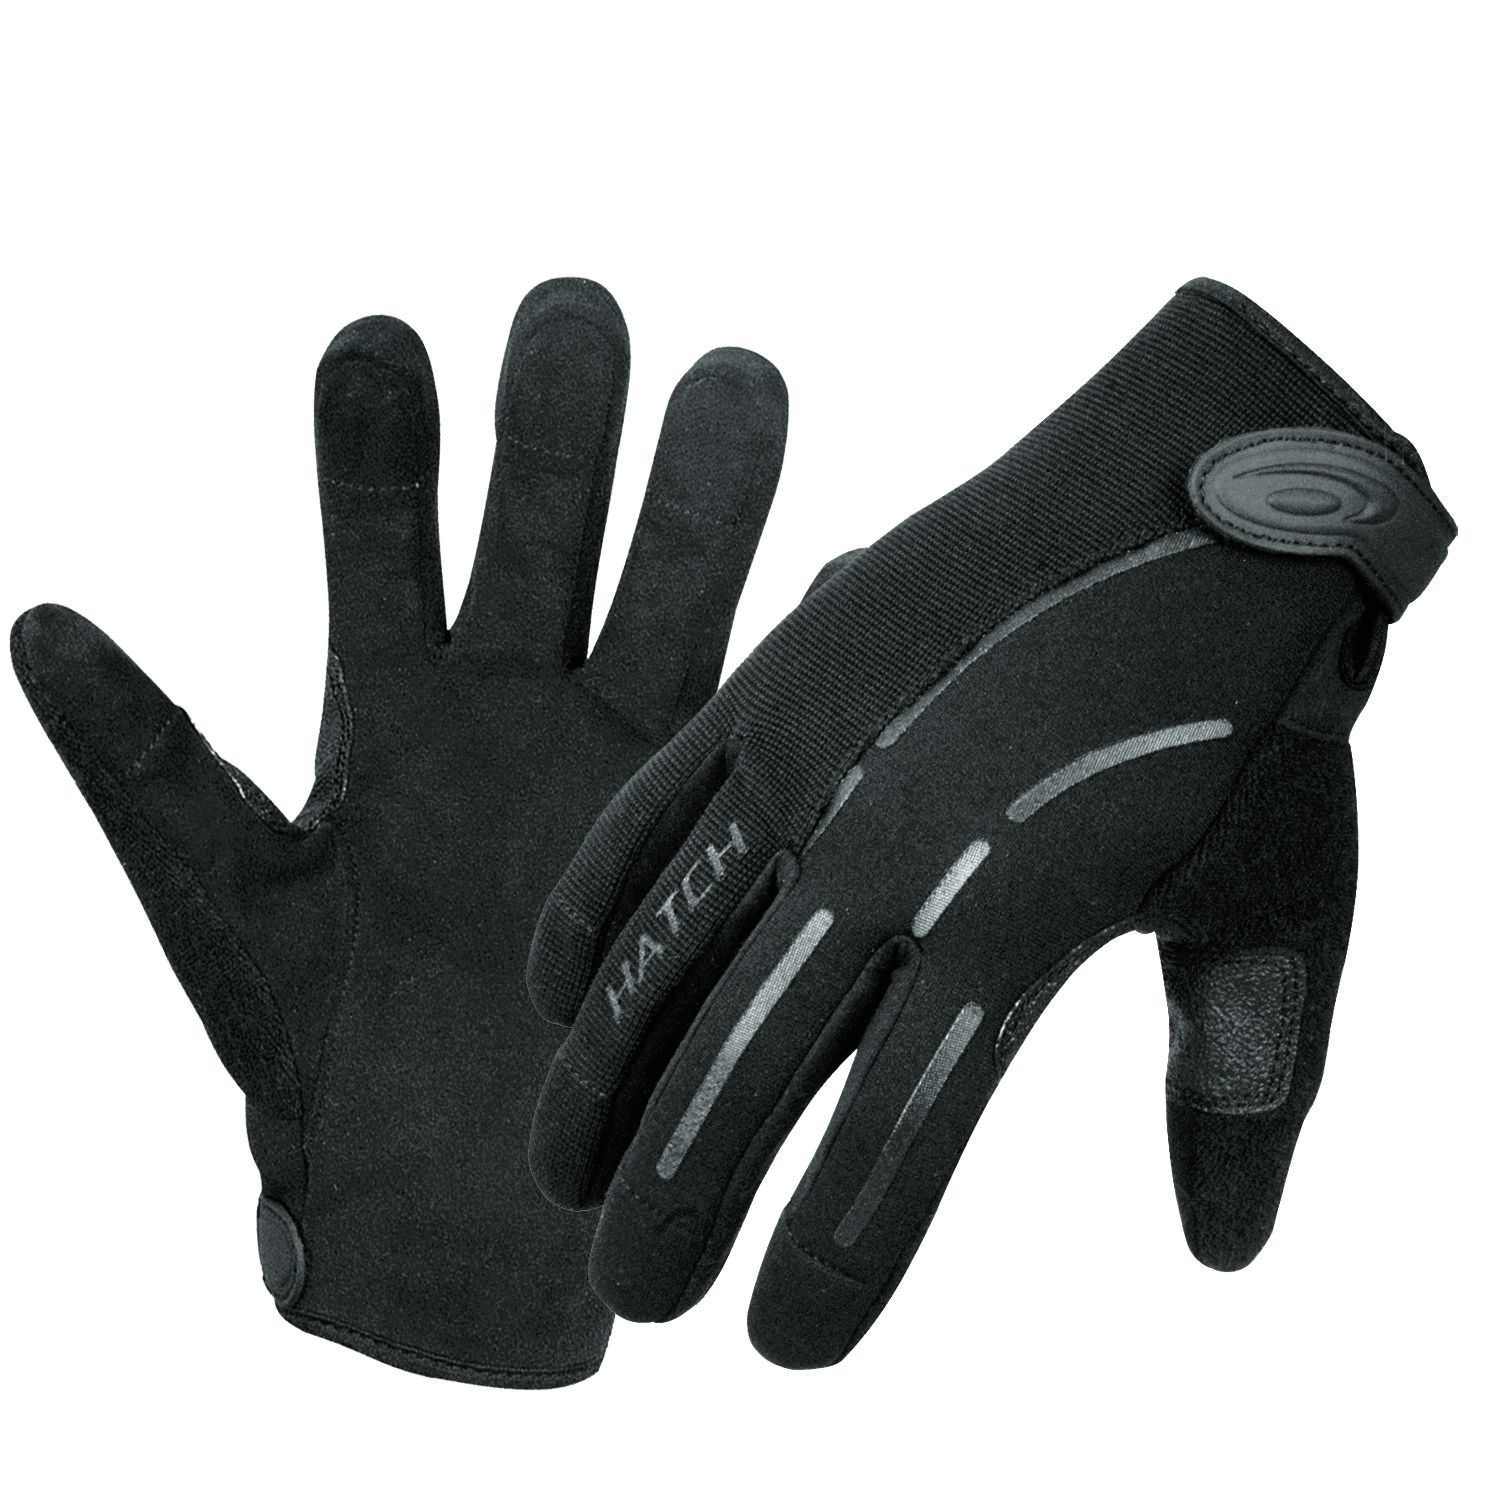 Details about   Hatch PPG2 Cut-Resistant Tactical Police Duty Glove with ArmorTip fingertips ... 